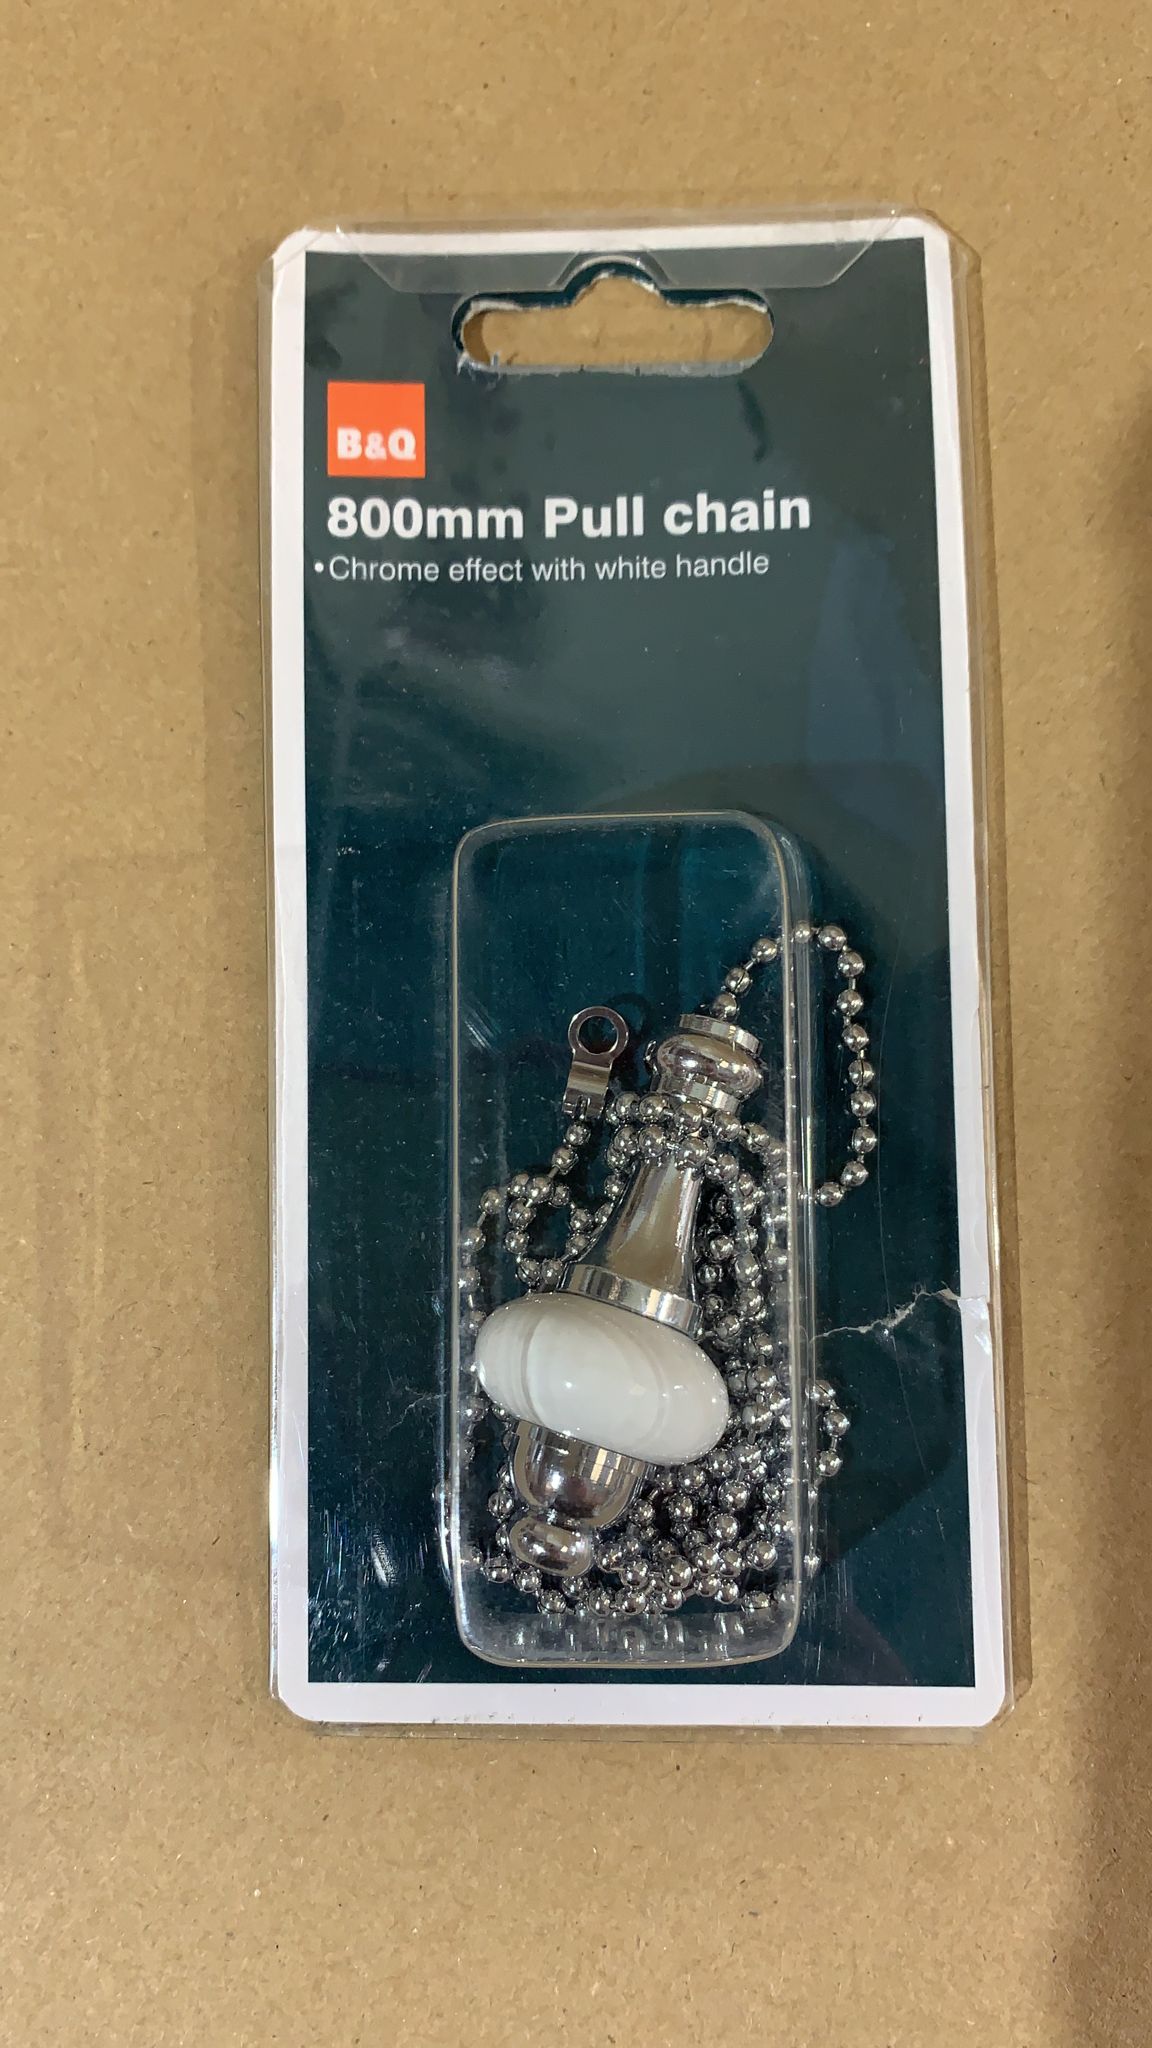 Ceramic Light pull Chain With White Handle Chrome effect 800mm 9742